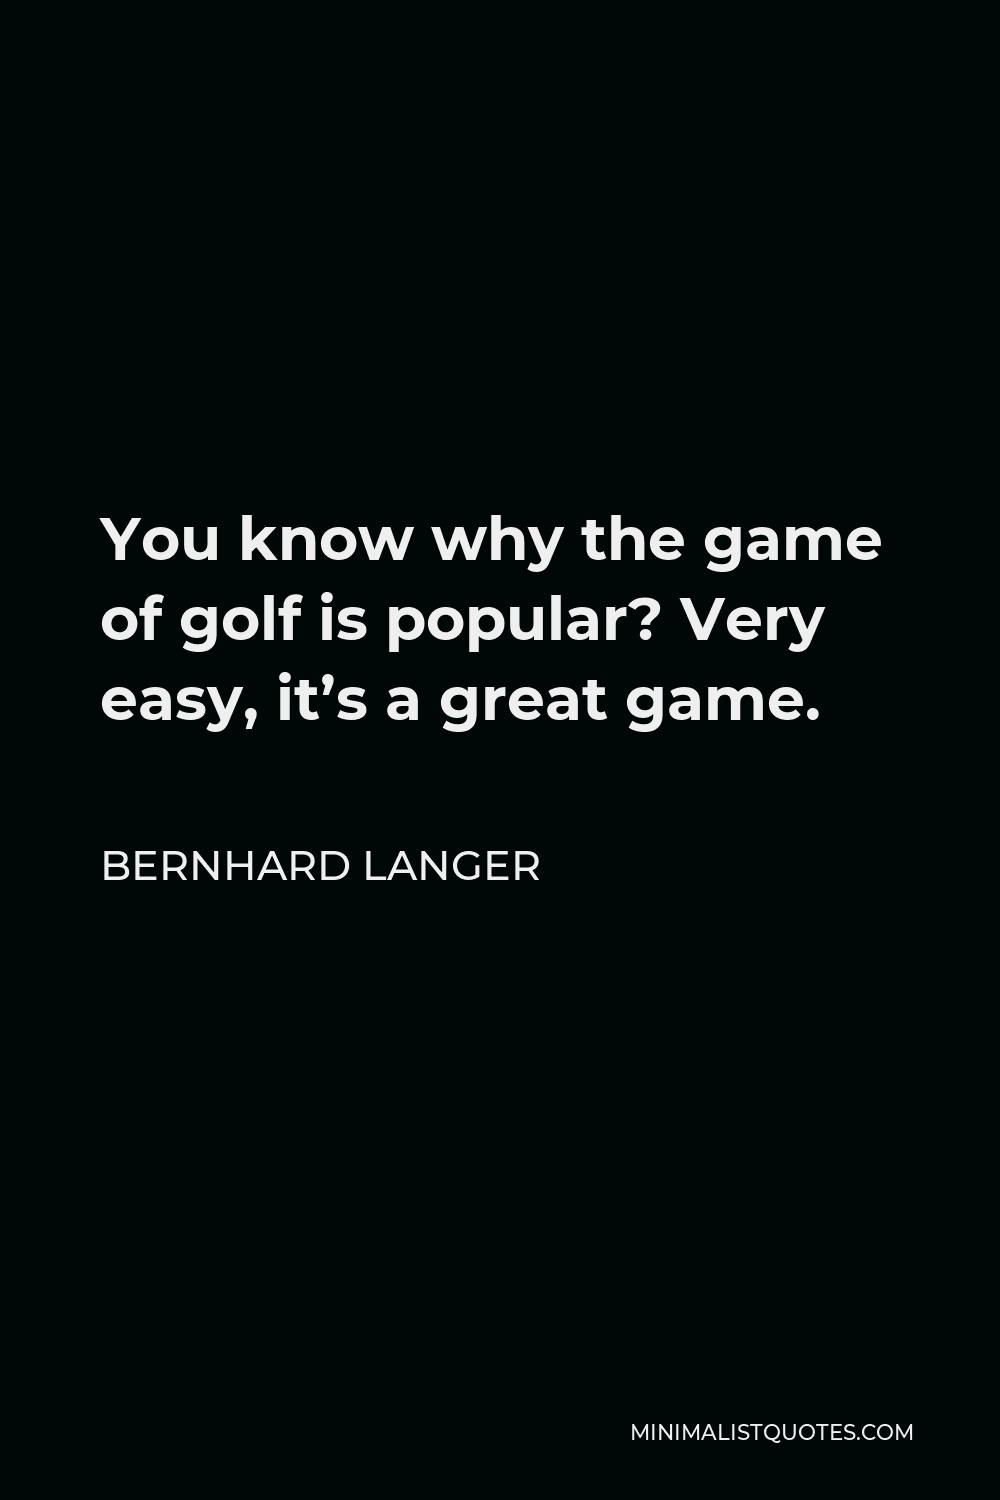 Bernhard Langer Quote - You know why the game of golf is popular? Very easy, it’s a great game.